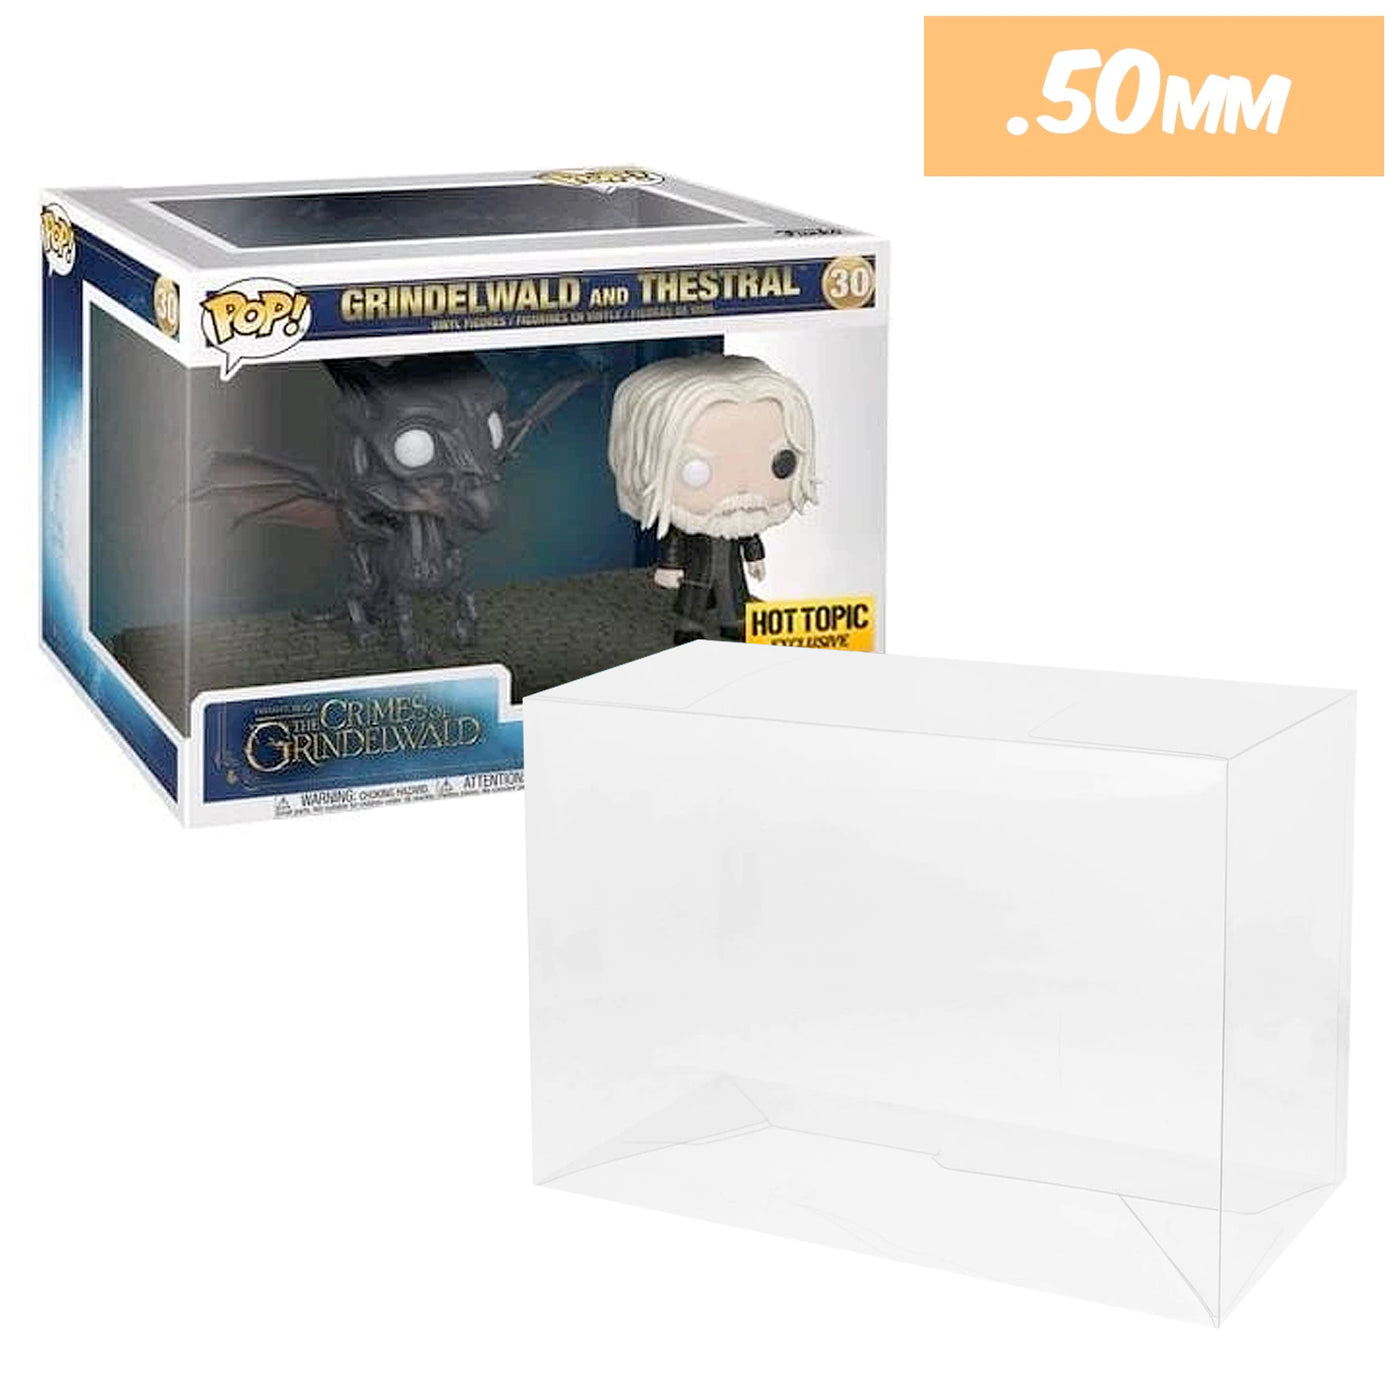 GRINDELWALD MOMENT Pop Protectors for Funko (50mm thick) 7.5h x 10.75w x 6.75d